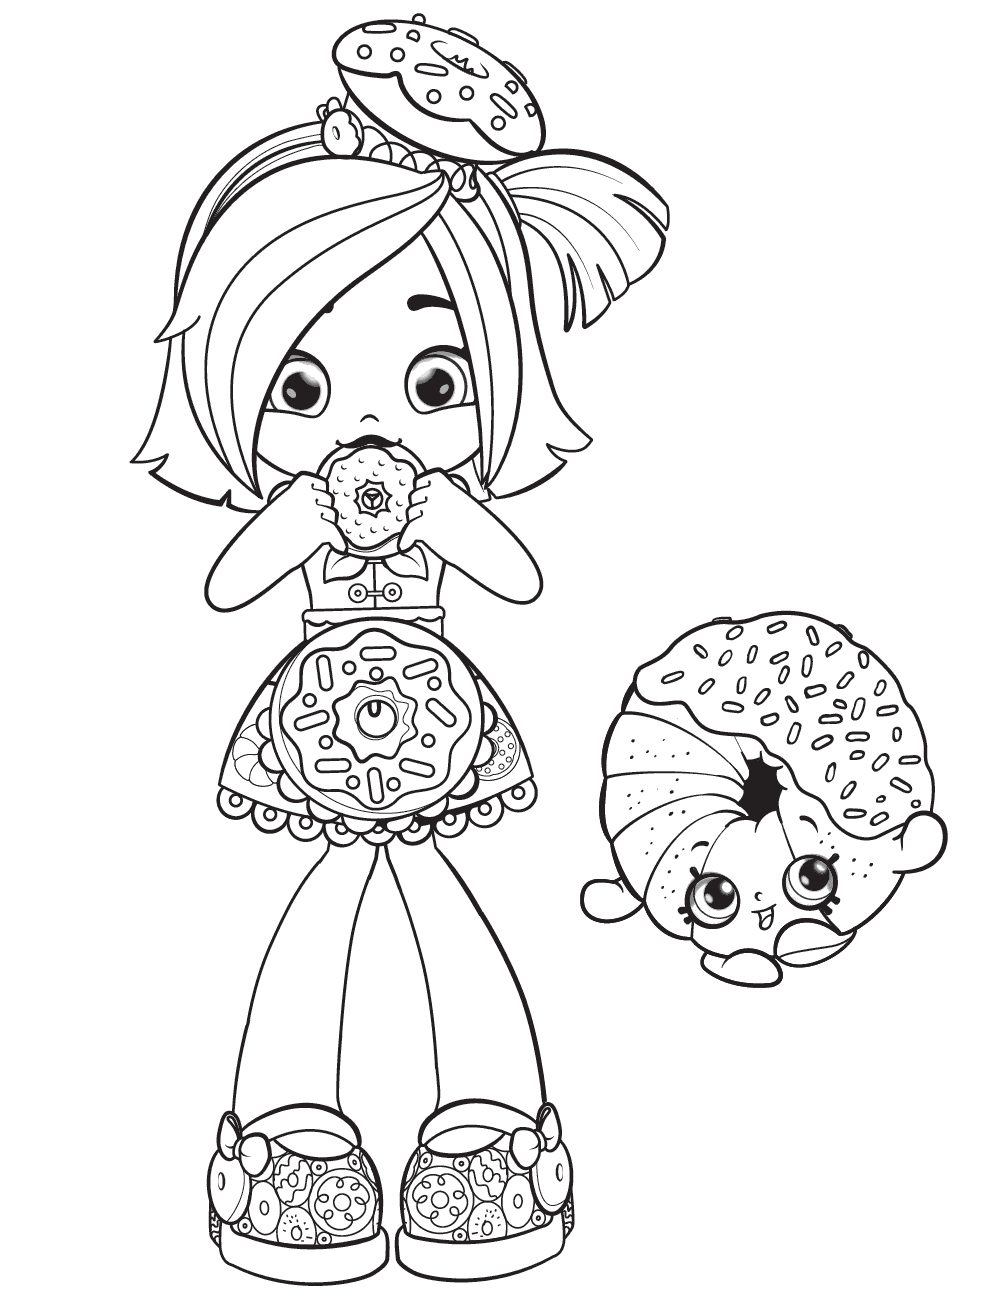 Shoppies Coloring Pages at GetColorings.com | Free printable colorings